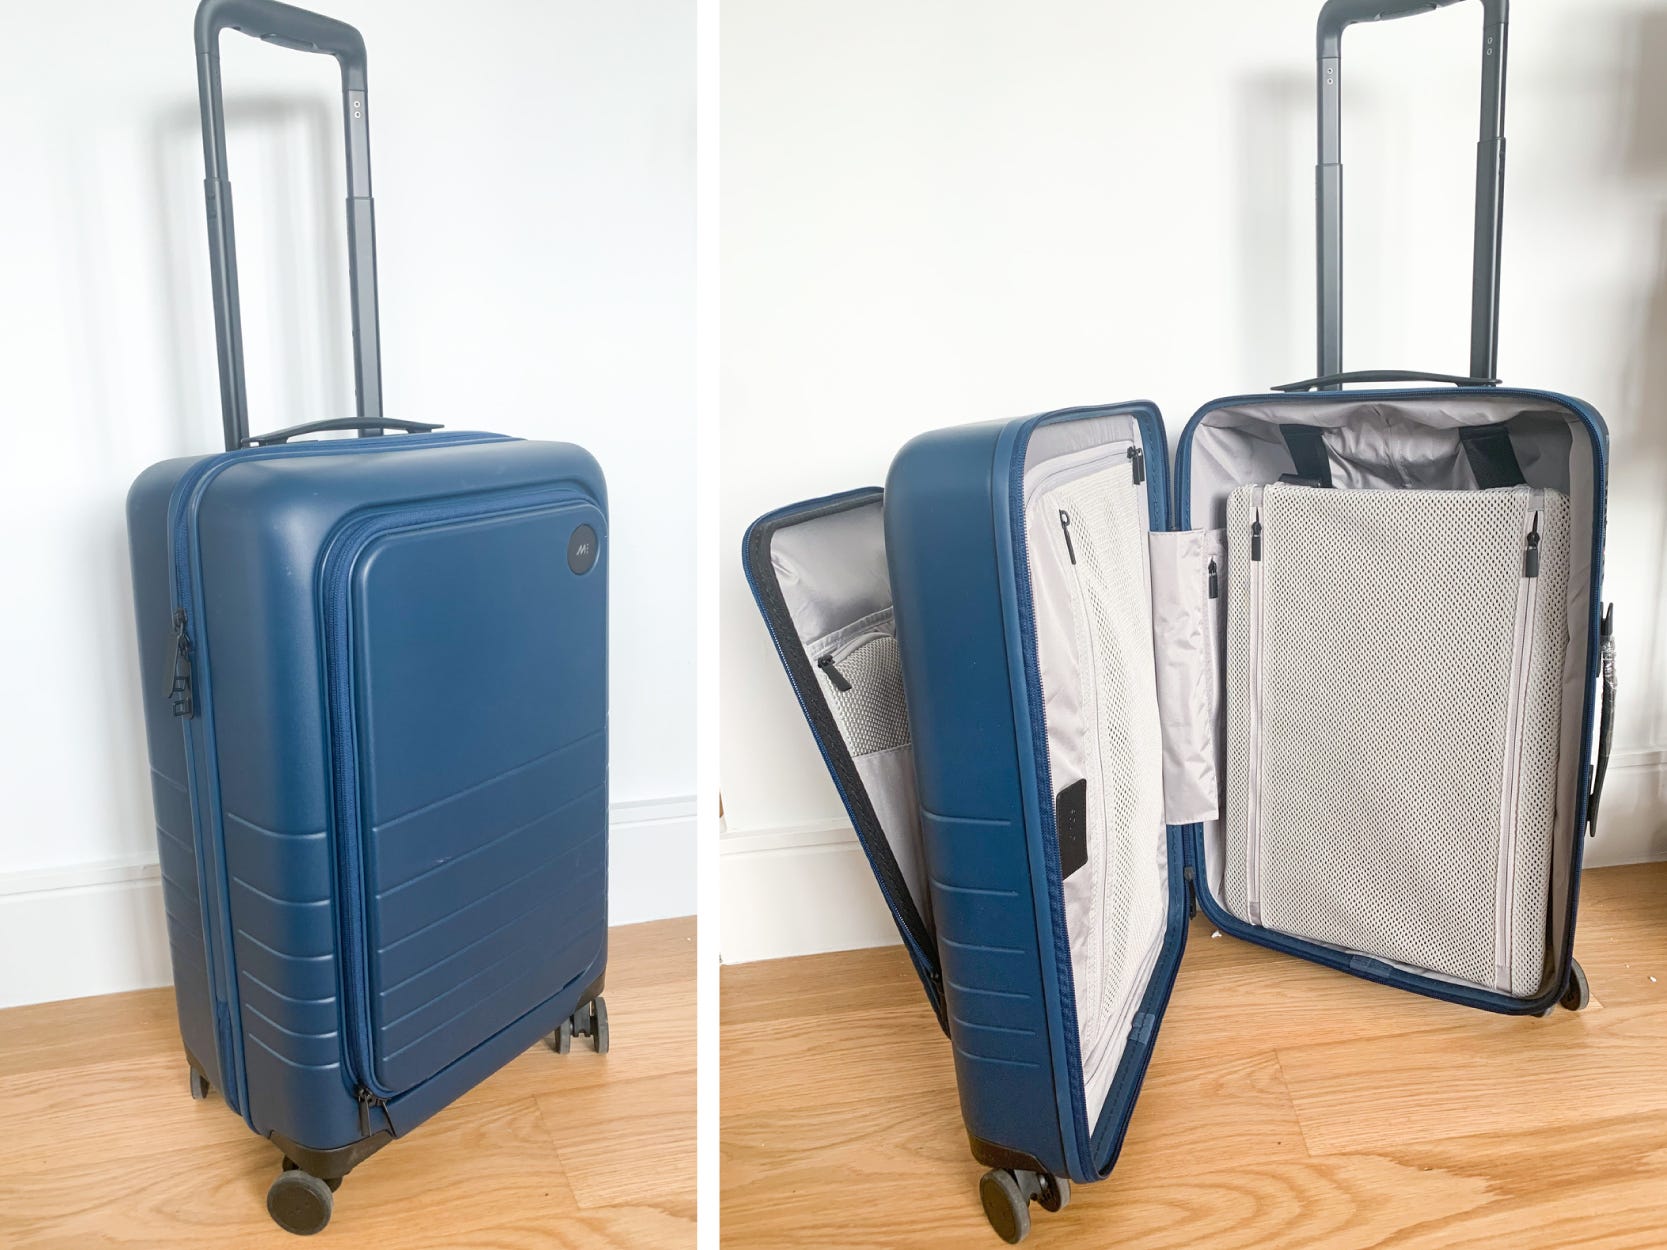 Best carry-on luggage - monos side by side